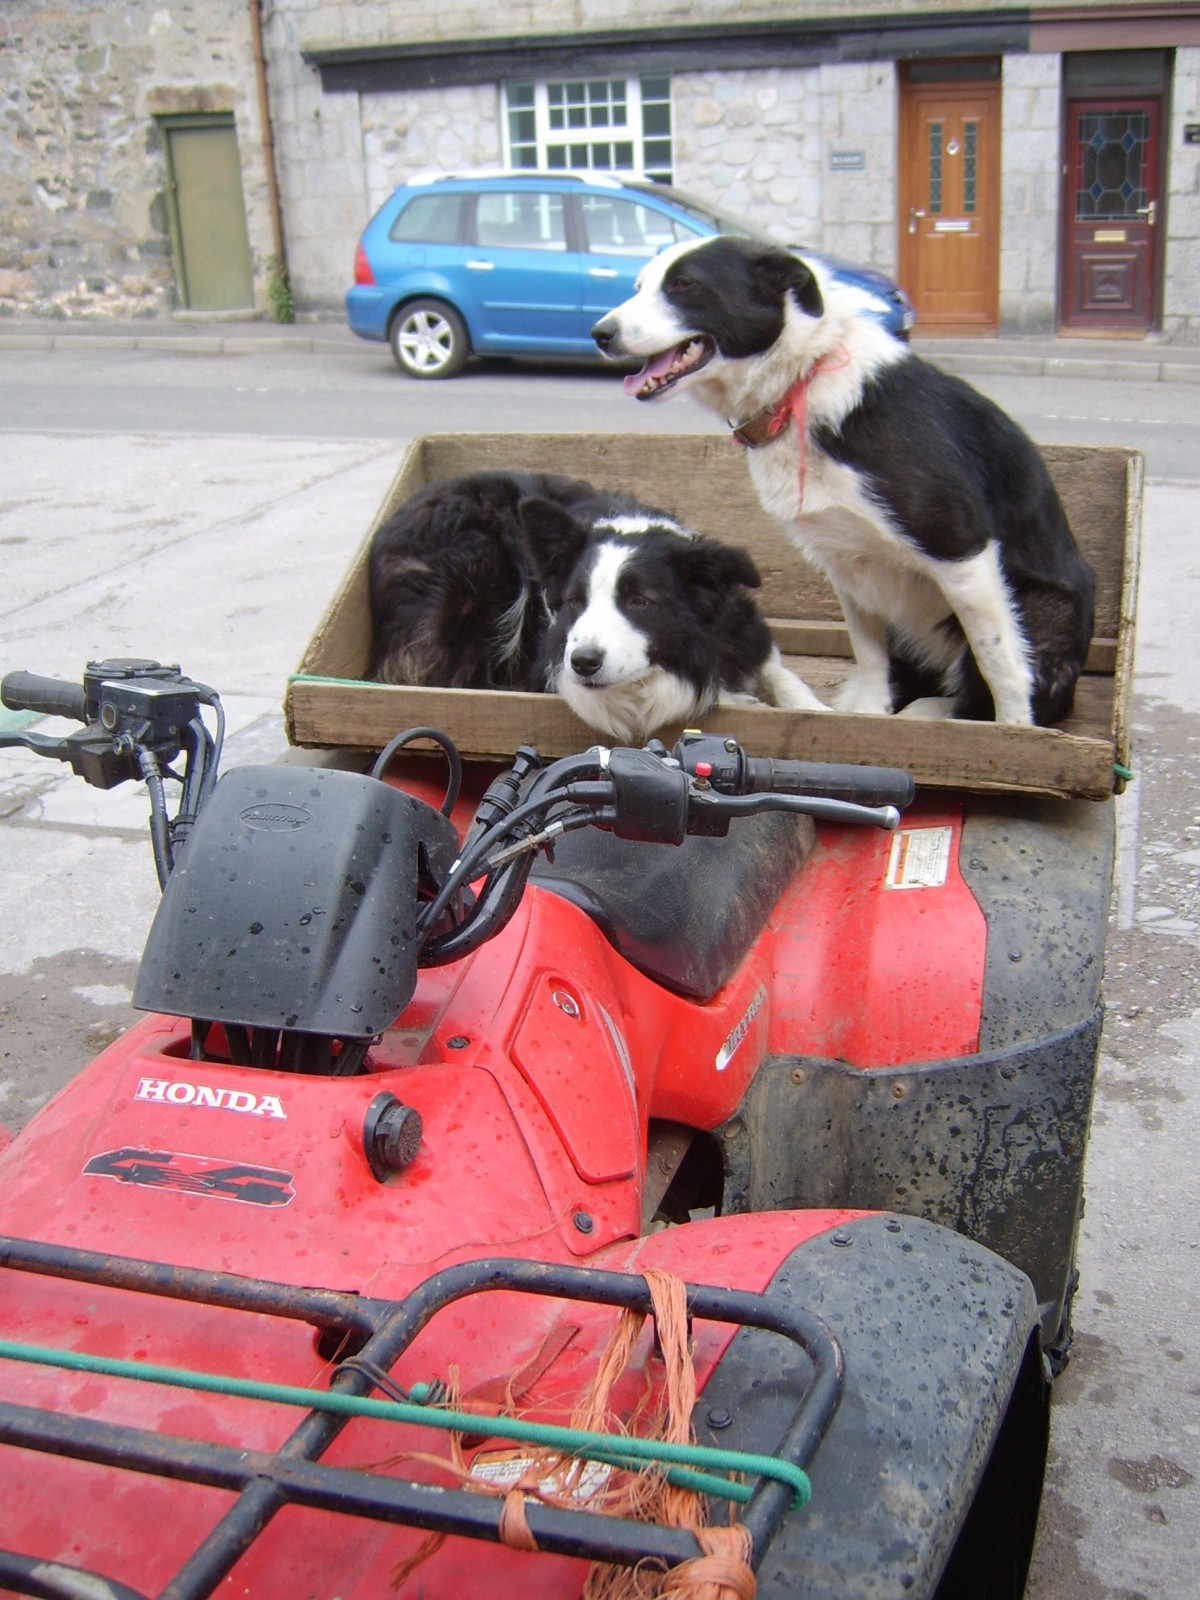 Dogs on a quad!